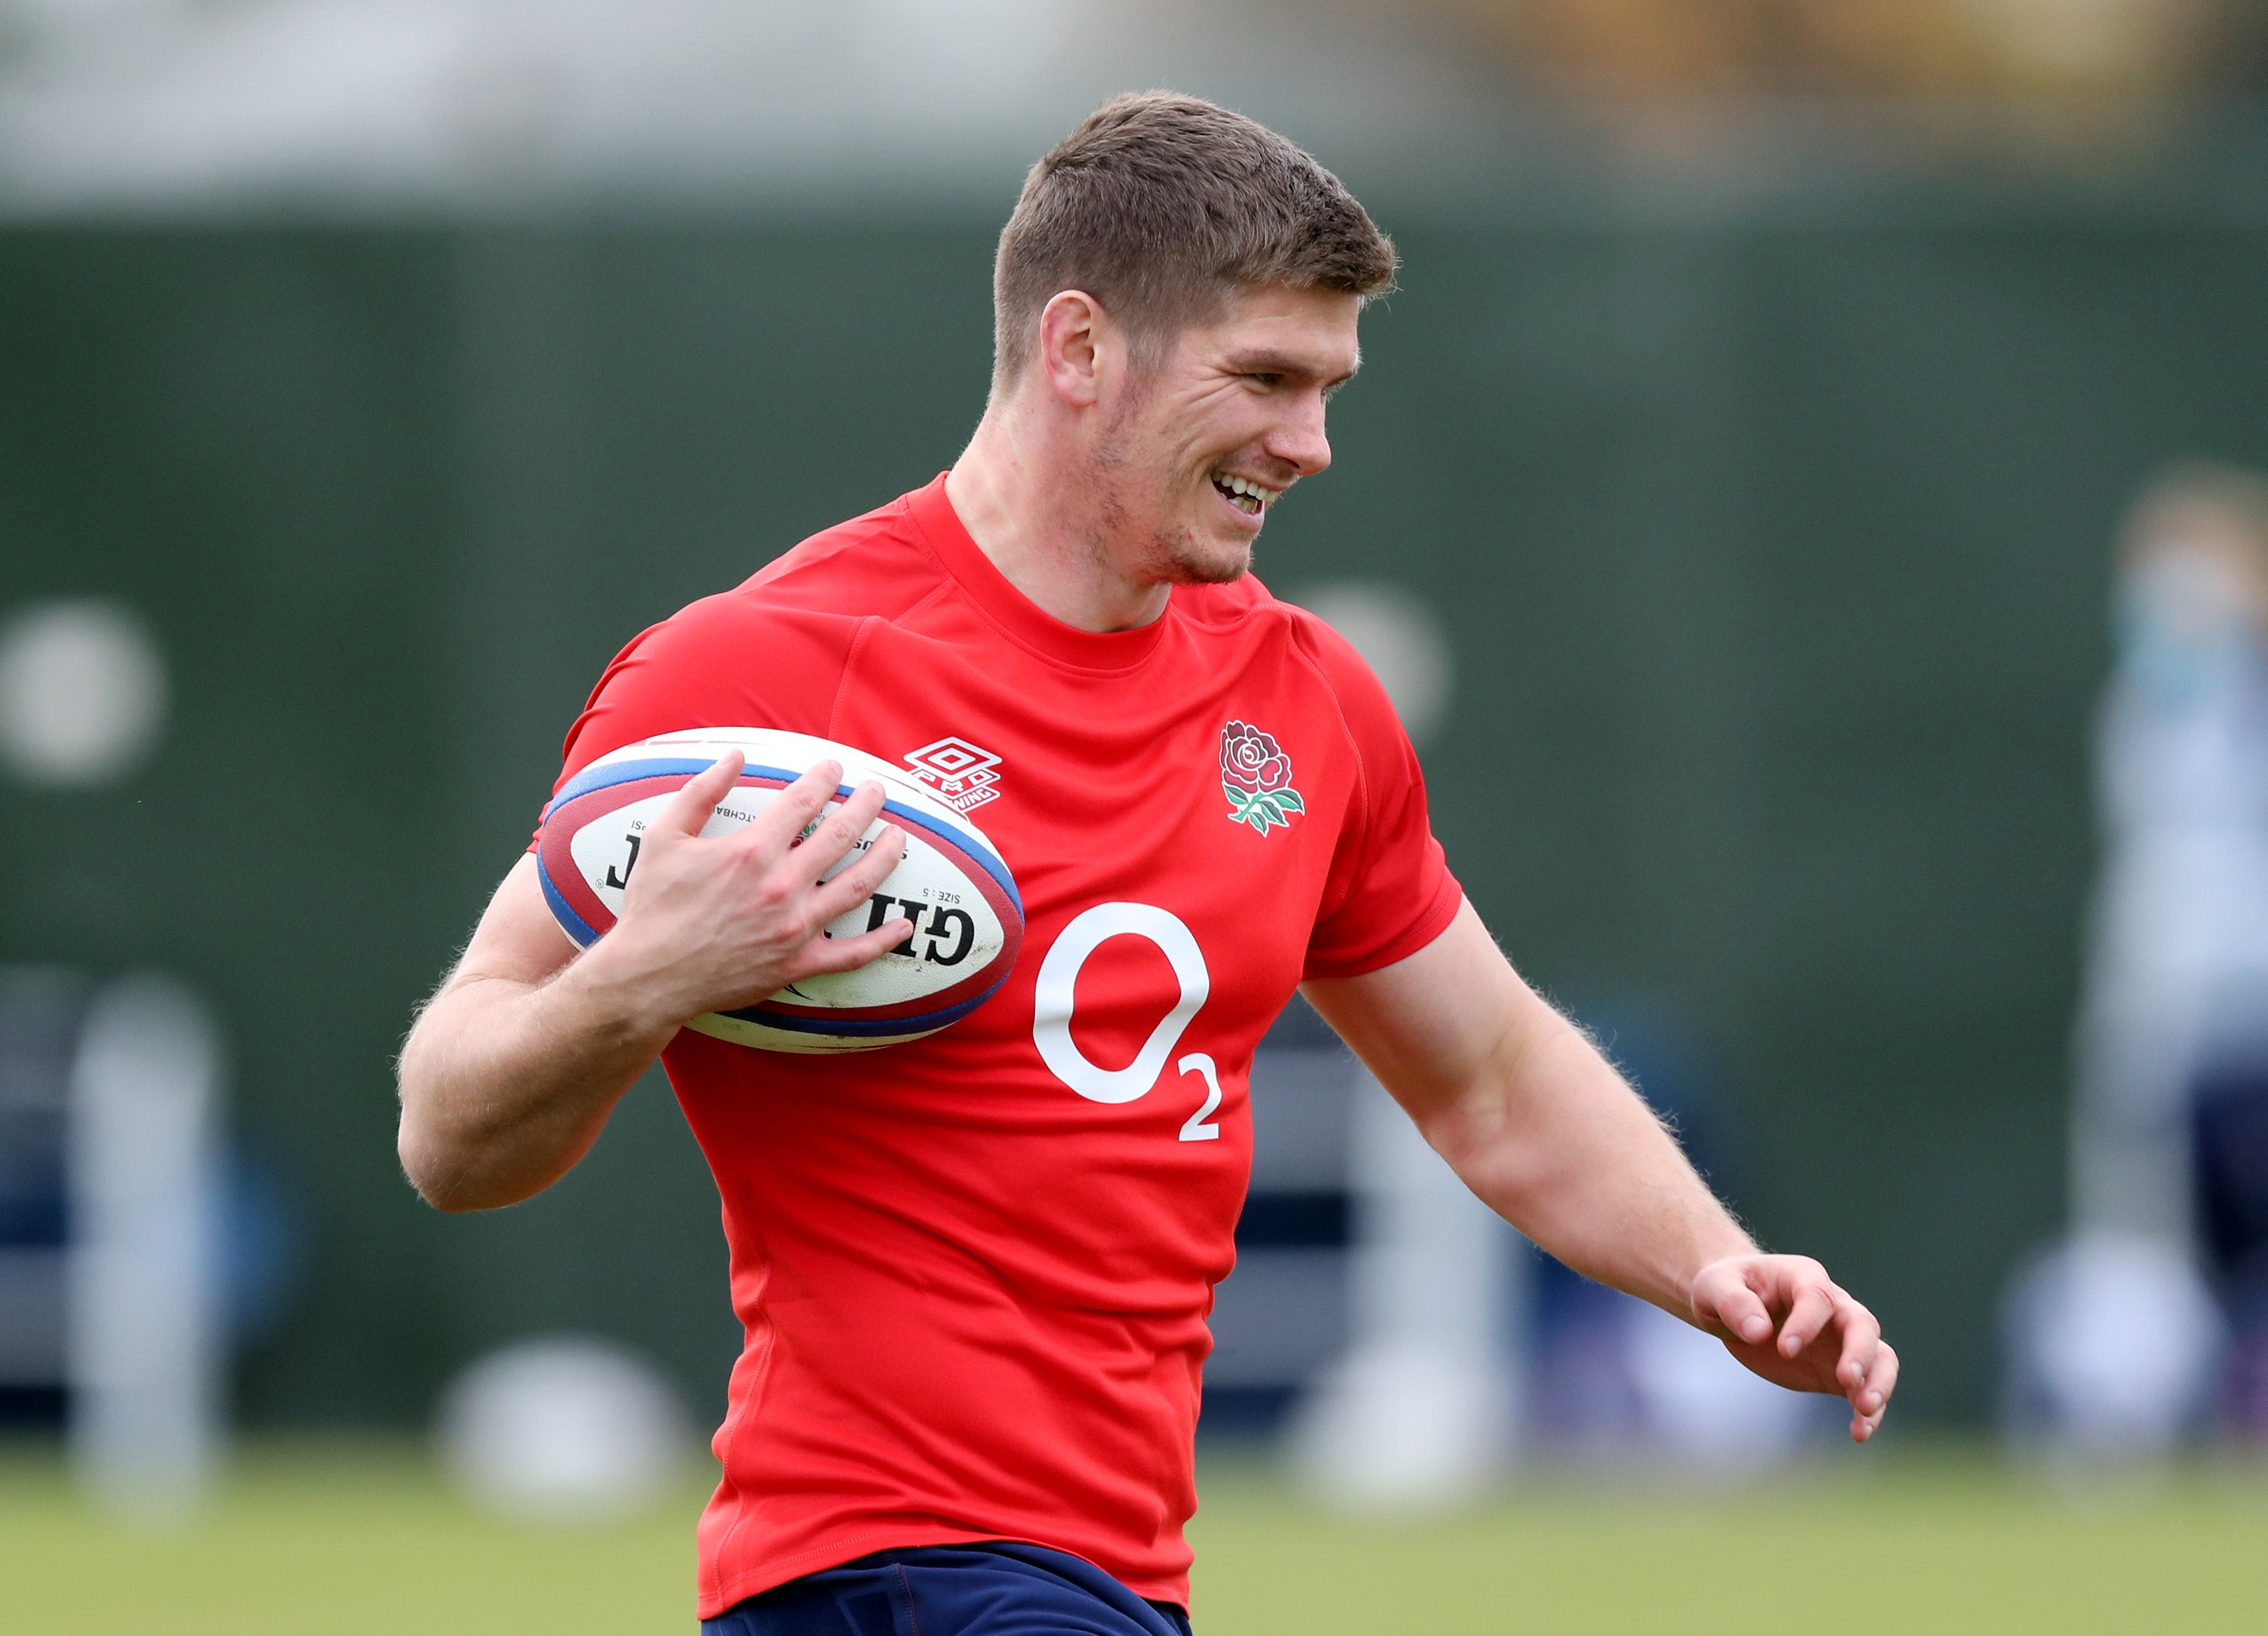 Owen Farrell took exception to the suggestion England are clear favourites